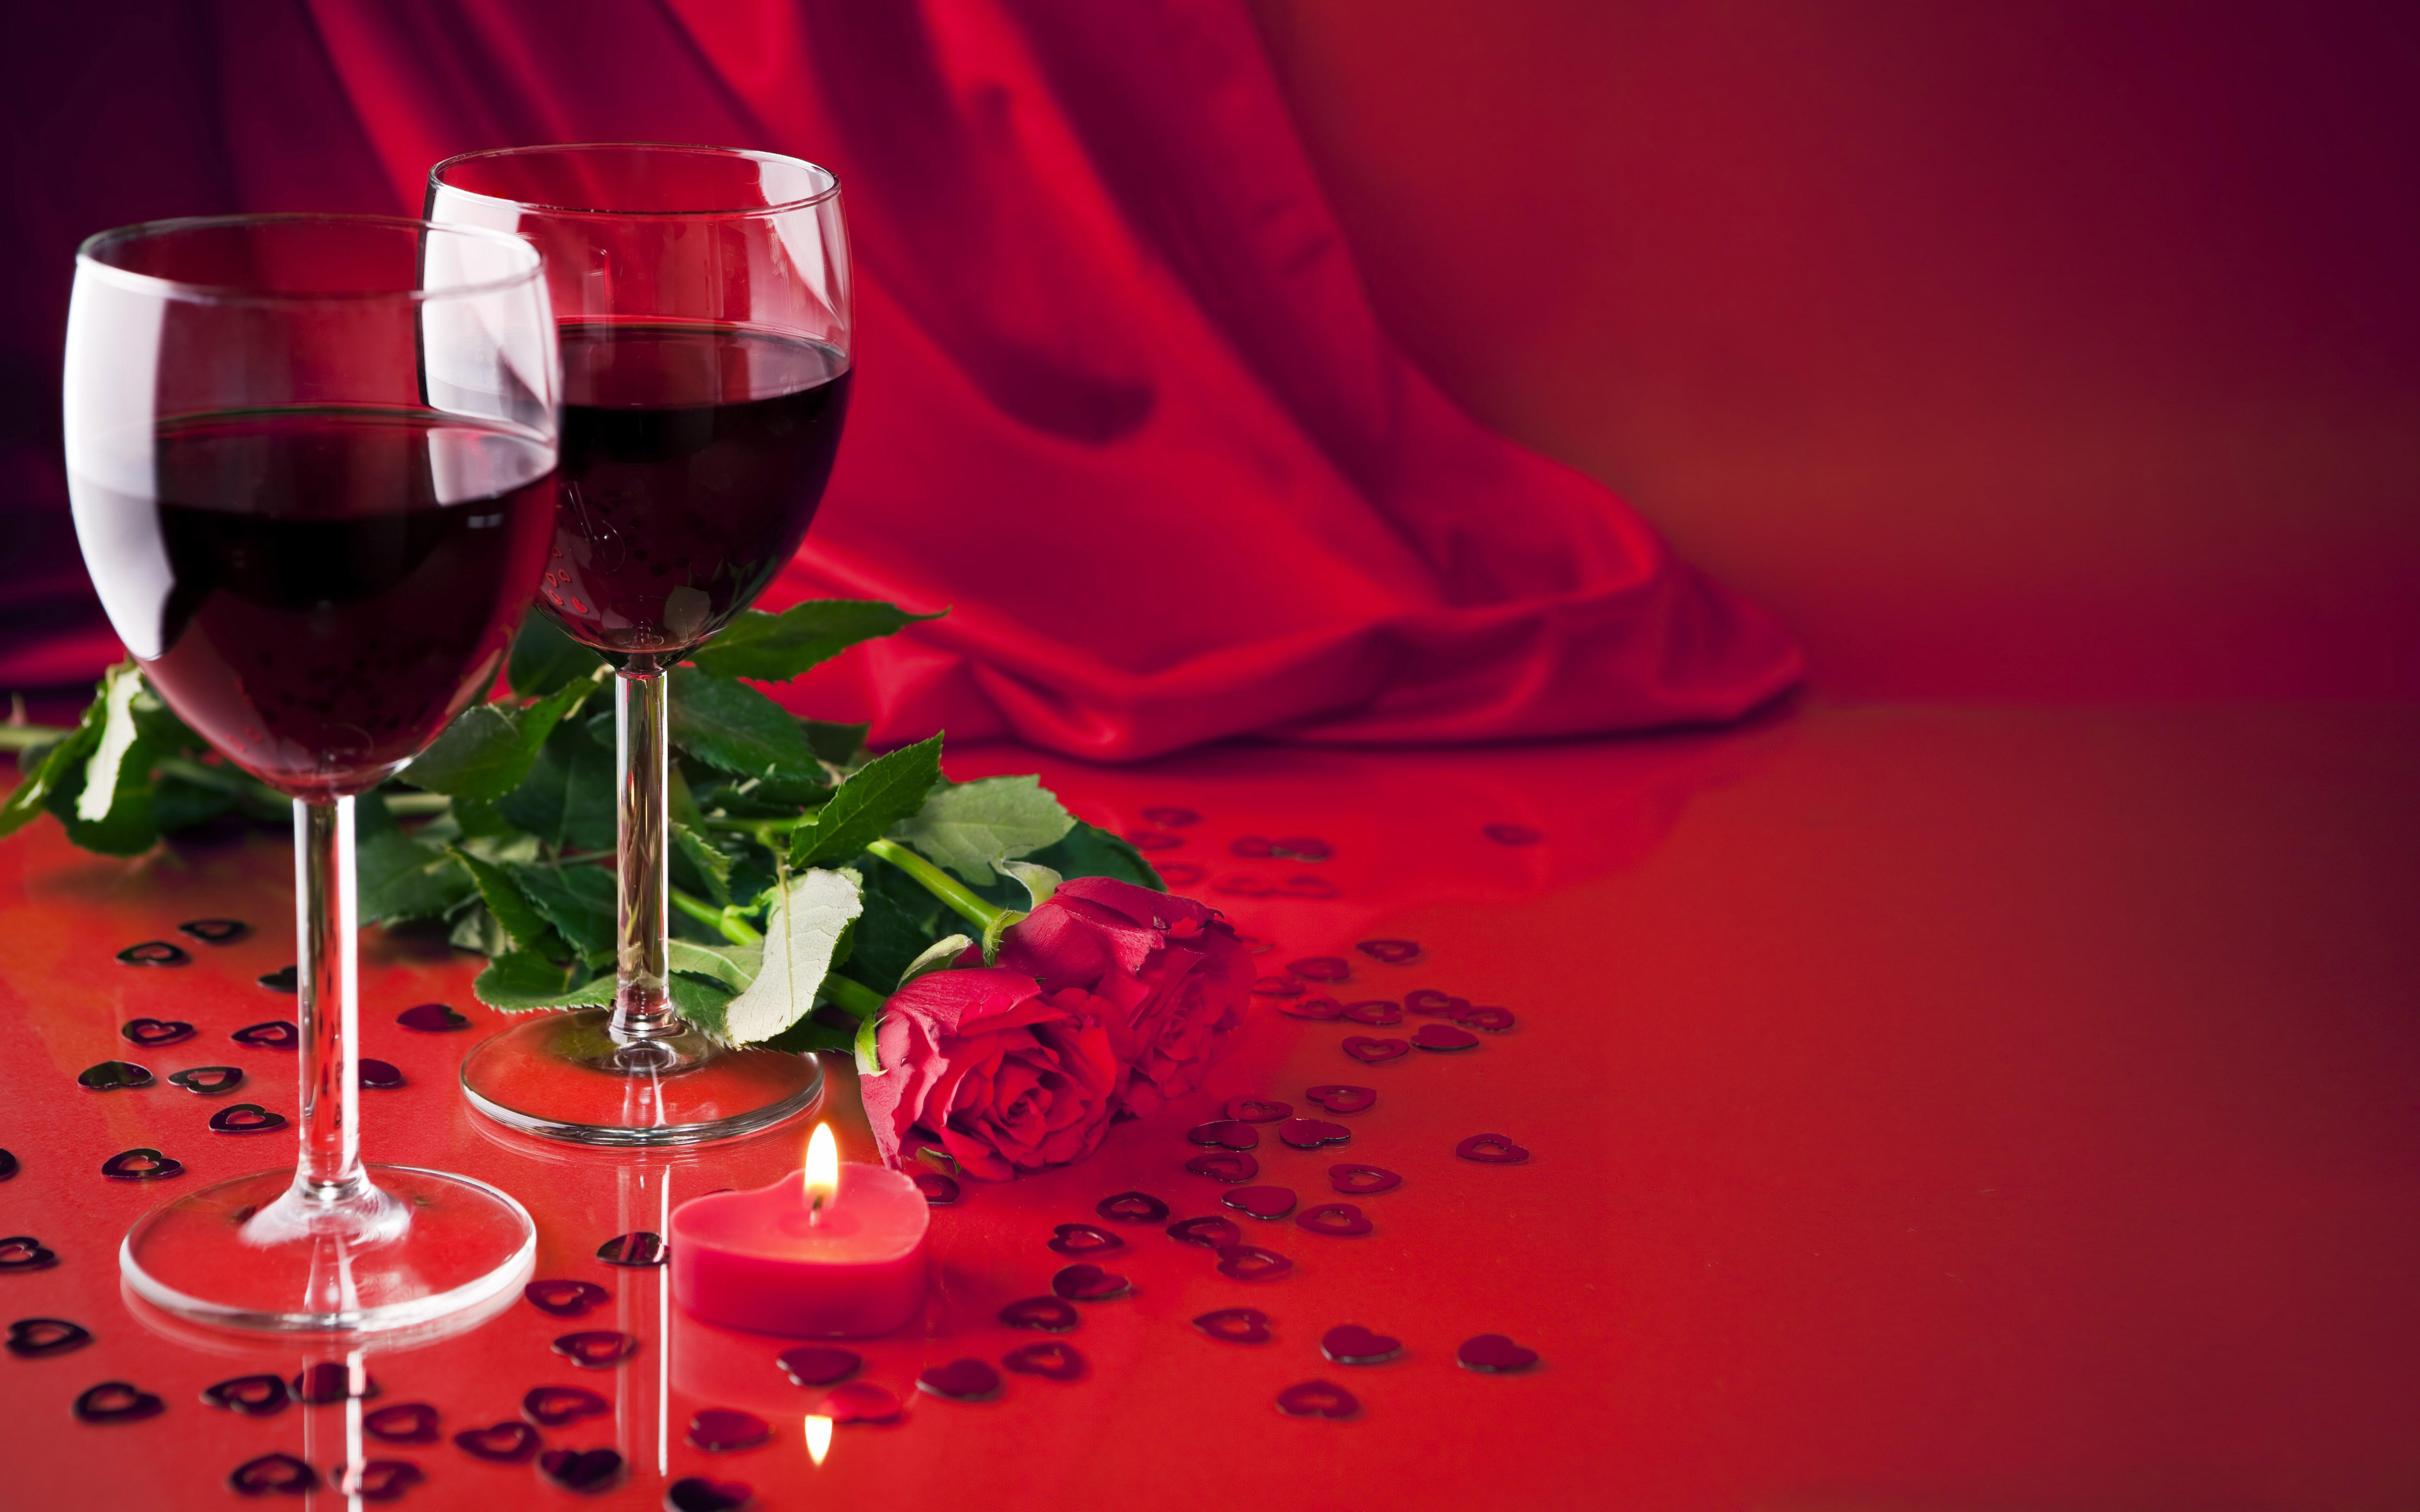 Romantic Evening Two Glasses Of Red Wine Flower Red Roses Romantic  Backgrounds 4k Hd Desktop Wallpapers For Tablets And Mobile Phones  5200x3250 : 